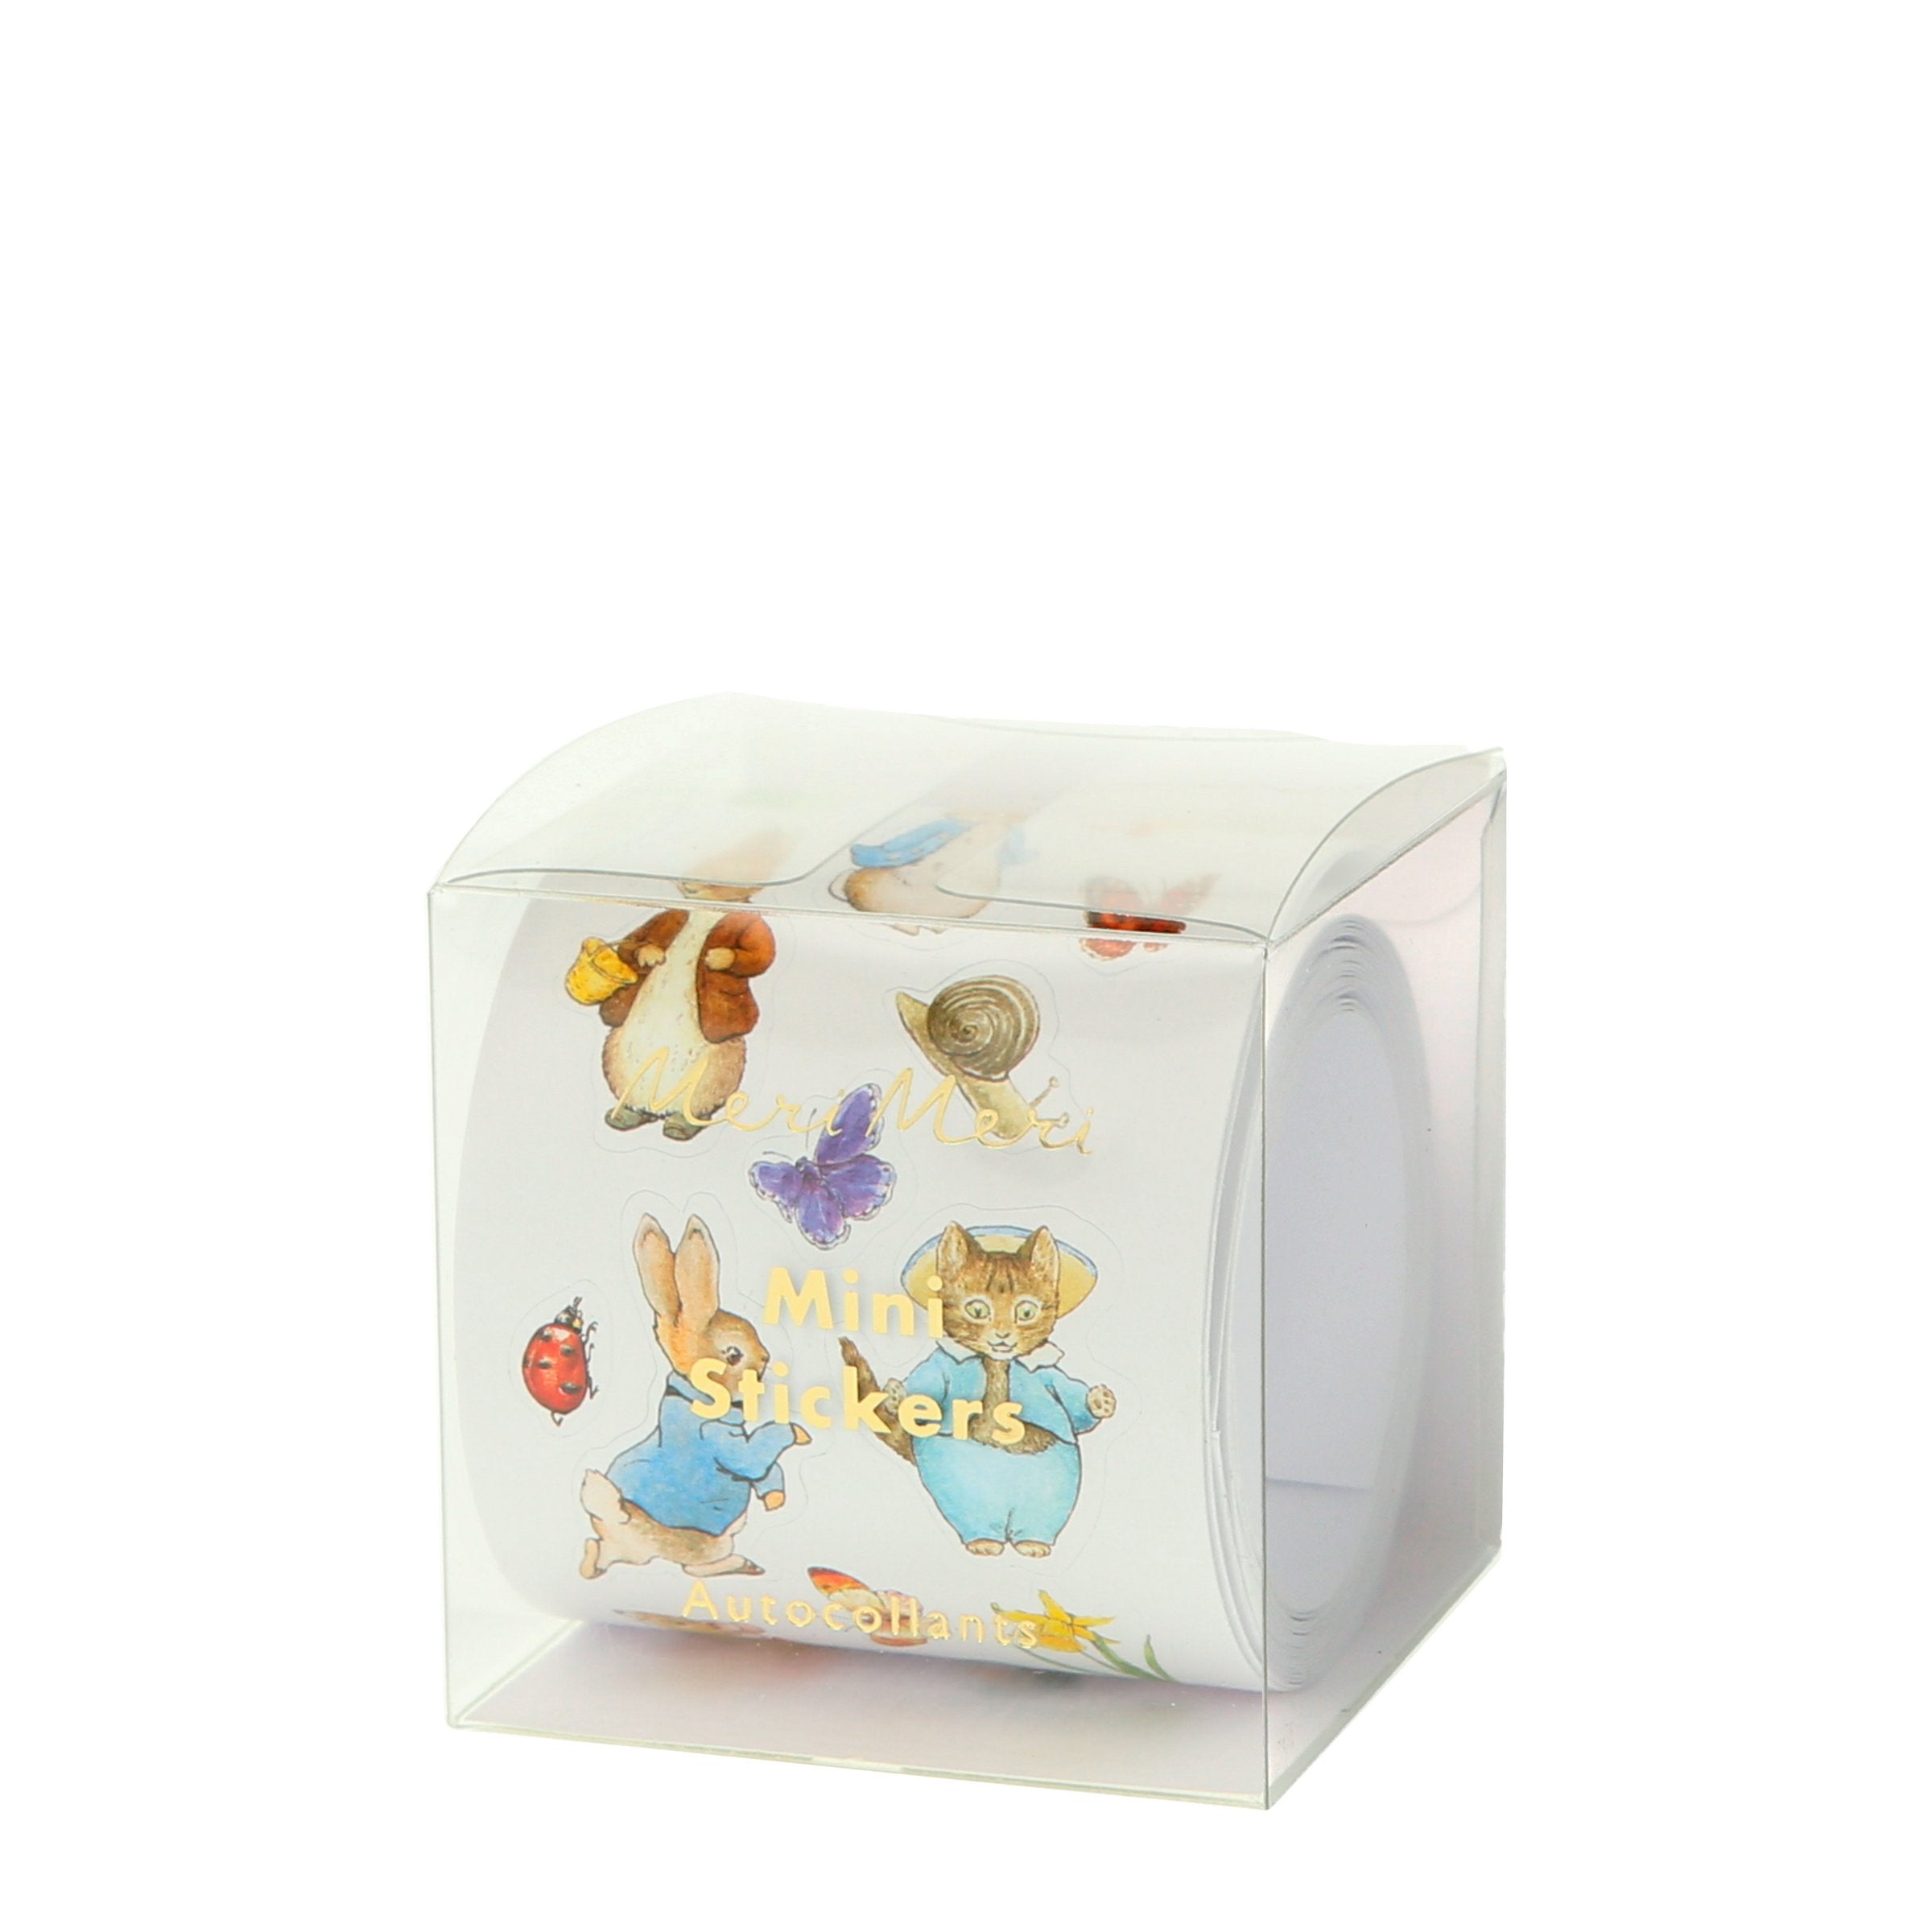 The 306 stickers come in an easy-to-use roll, with 17 delightful Peter Rabbit and friends designs.